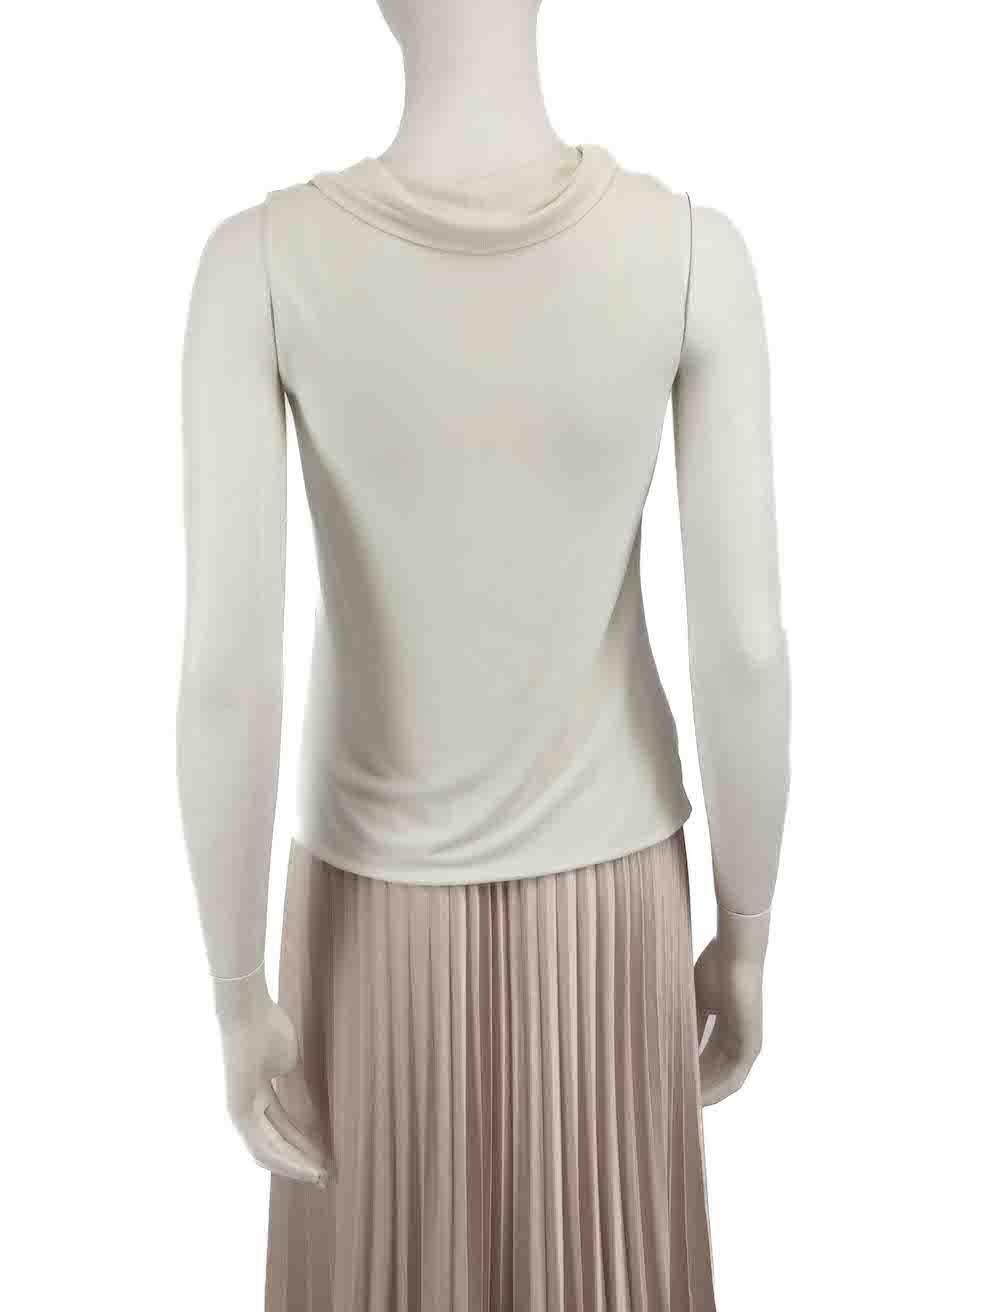 Gucci White Draped Neck Sleeveless Top Size XS In Good Condition For Sale In London, GB